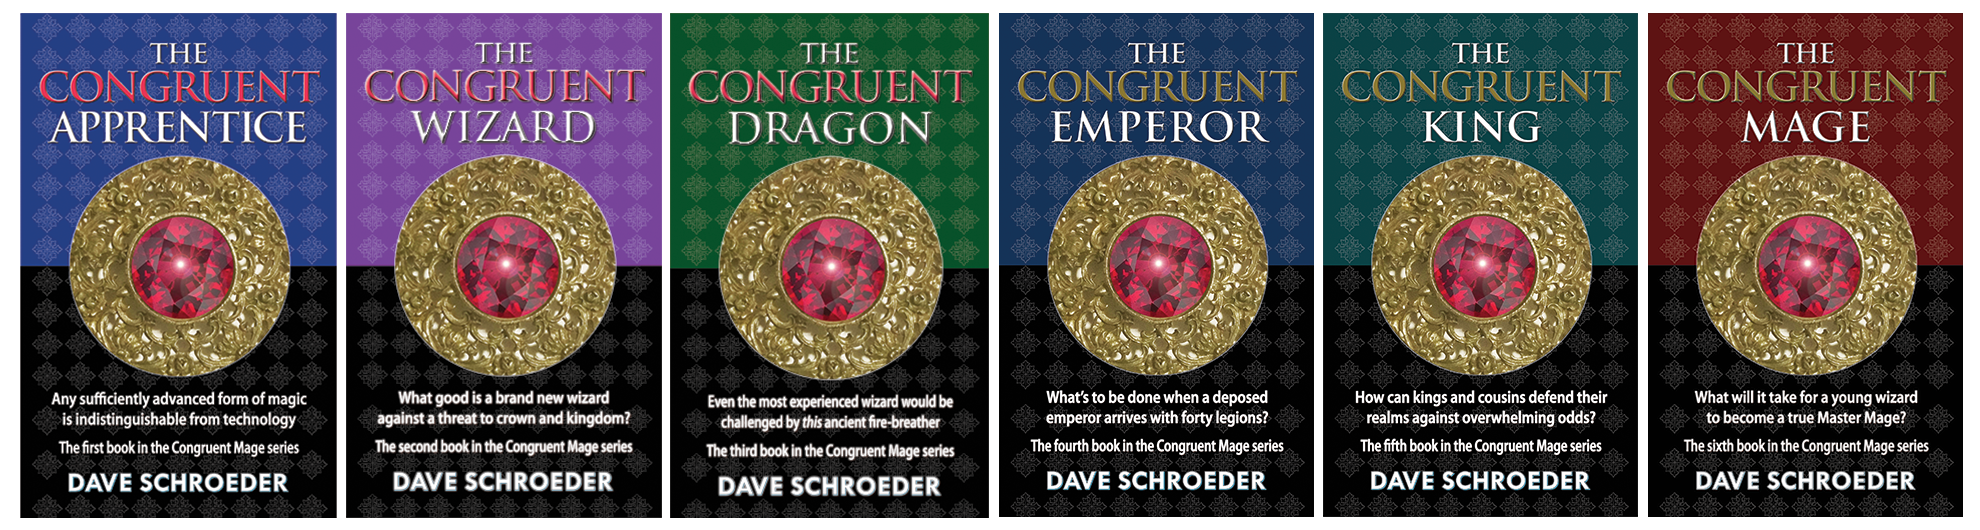 Covers for the Congruent Mage Series